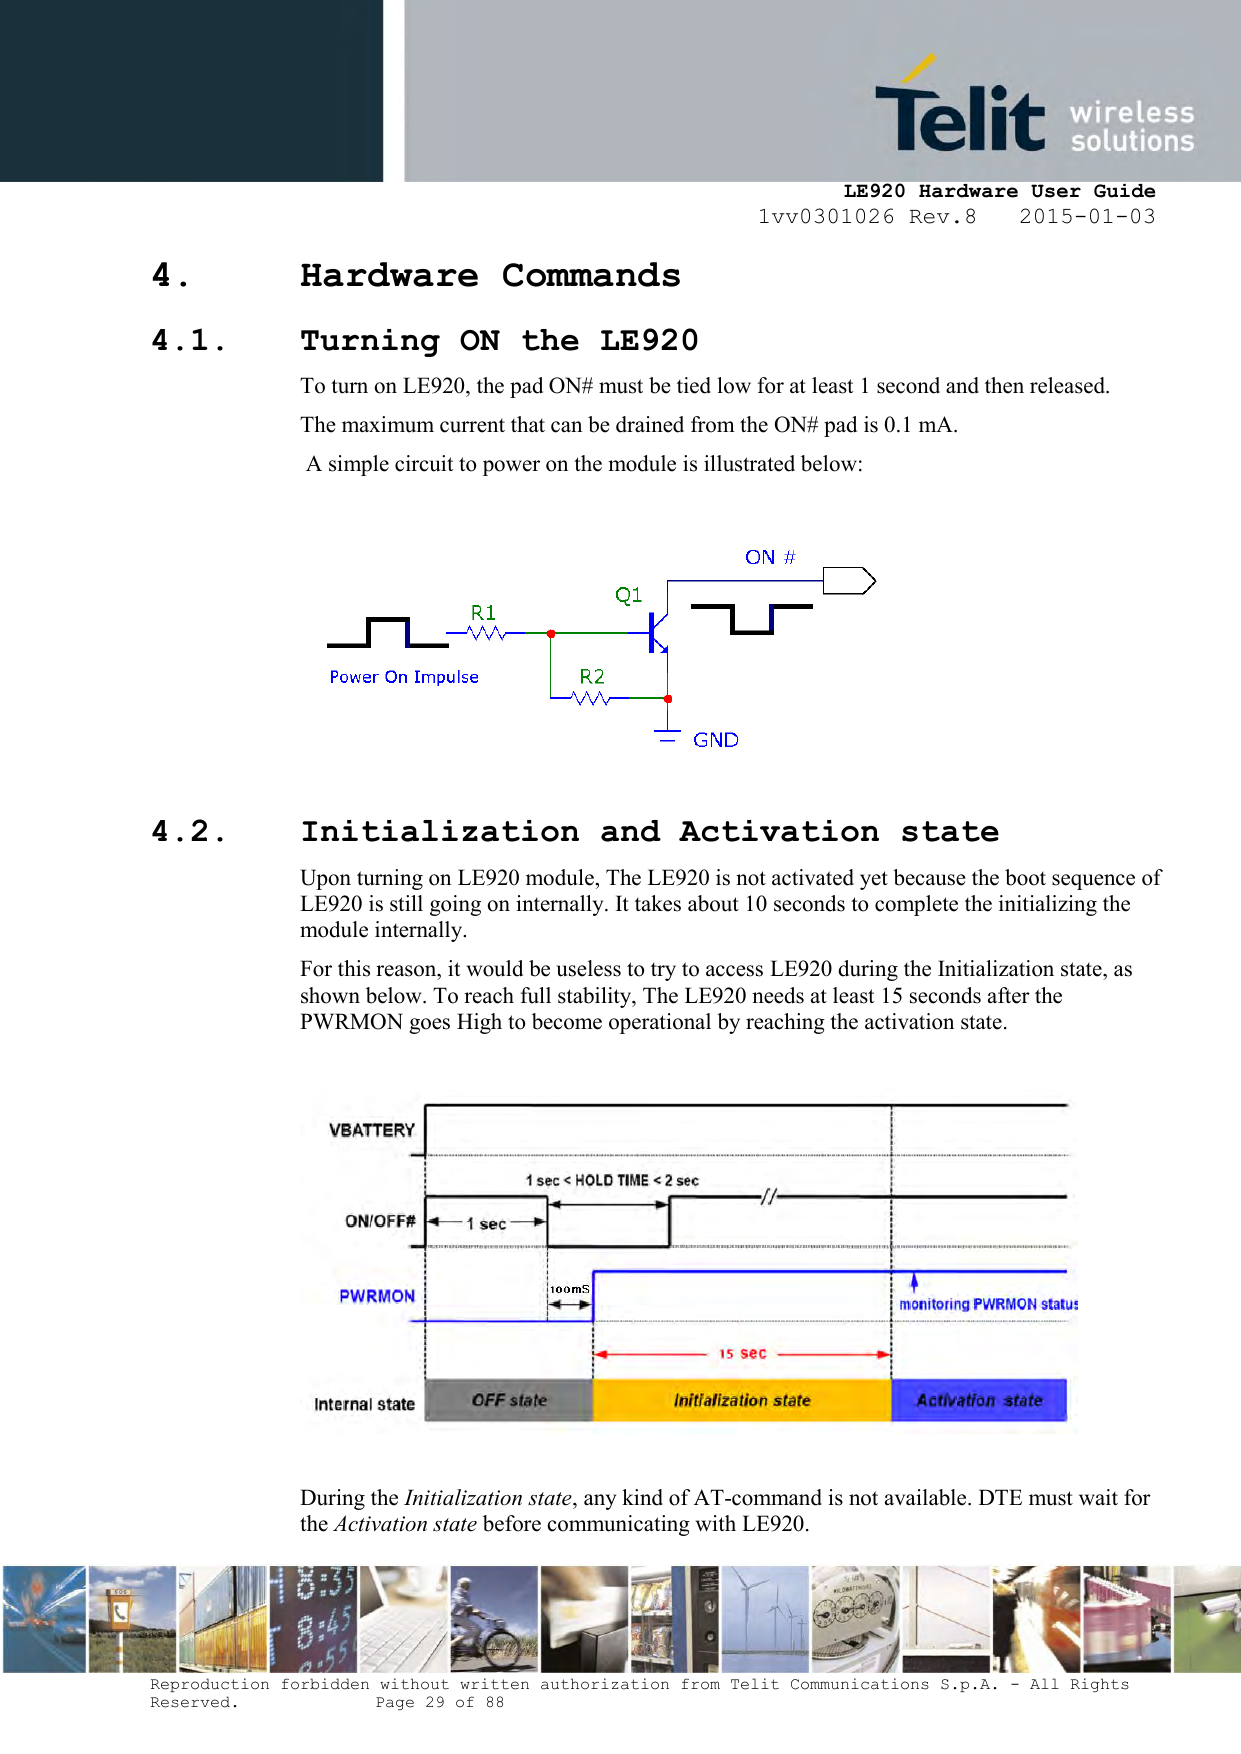     LE920 Hardware User Guide 1vv0301026 Rev.8   2015-01-03 Reproduction forbidden without written authorization from Telit Communications S.p.A. - All Rights Reserved.    Page 29 of 88  4. Hardware Commands 4.1. Turning ON the LE920 To turn on LE920, the pad ON# must be tied low for at least 1 second and then released. The maximum current that can be drained from the ON# pad is 0.1 mA.  A simple circuit to power on the module is illustrated below:   4.2. Initialization and Activation state Upon turning on LE920 module, The LE920 is not activated yet because the boot sequence of LE920 is still going on internally. It takes about 10 seconds to complete the initializing the module internally. For this reason, it would be useless to try to access LE920 during the Initialization state, as shown below. To reach full stability, The LE920 needs at least 15 seconds after the PWRMON goes High to become operational by reaching the activation state.    During the Initialization state, any kind of AT-command is not available. DTE must wait for the Activation state before communicating with LE920. 